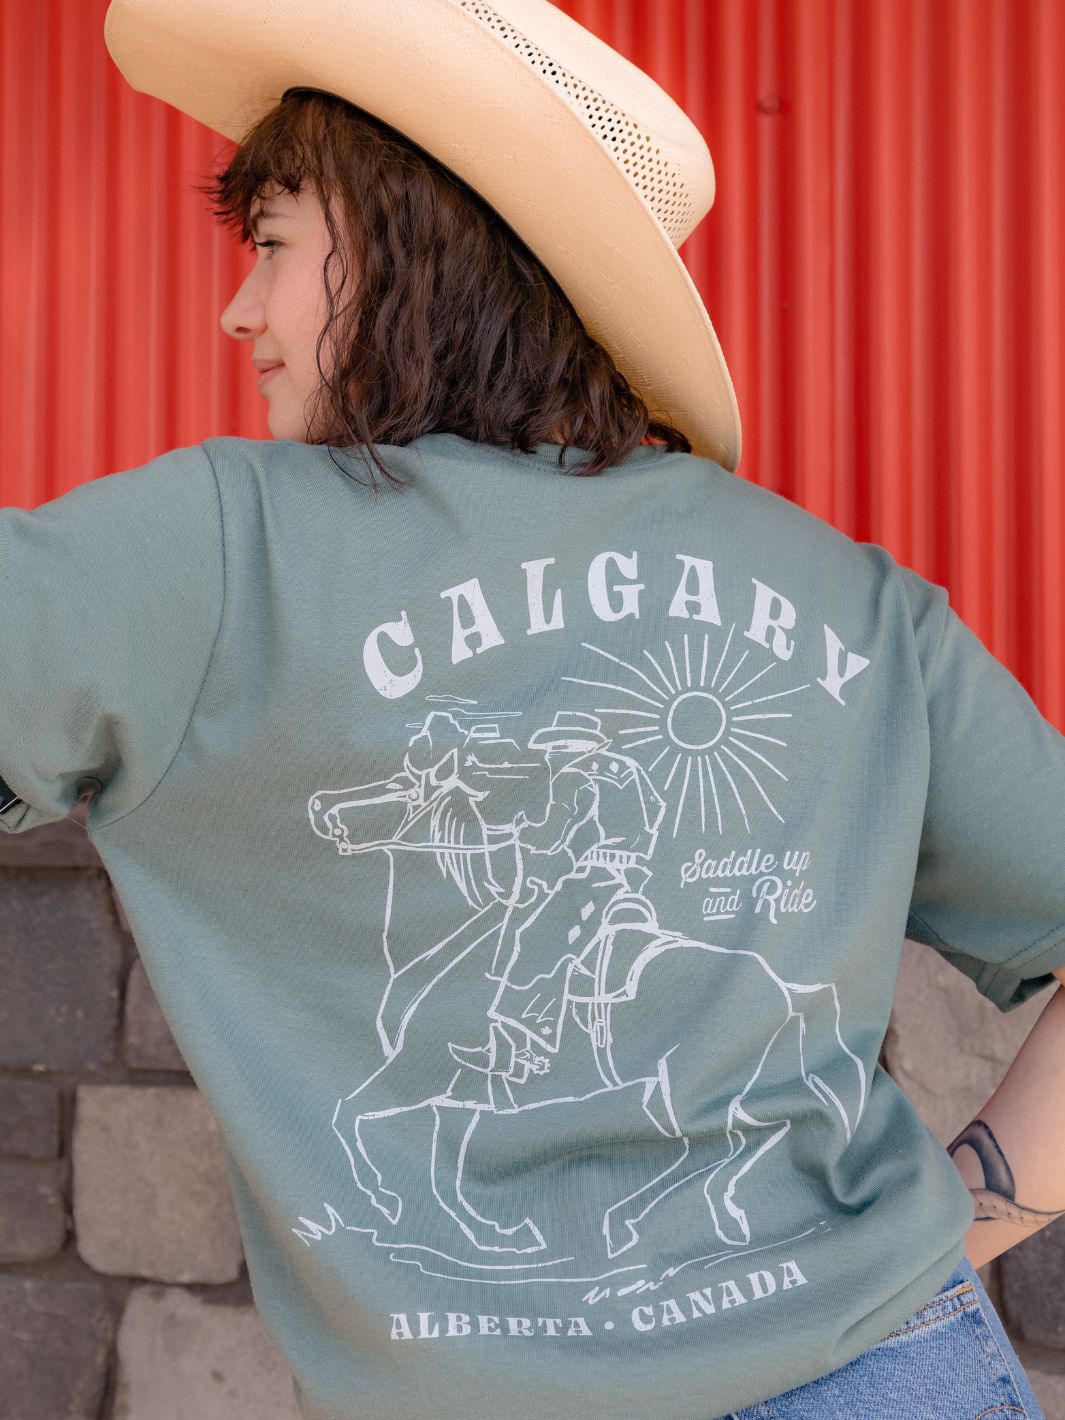 Individual showcasing the Local Laundry Saddle Up and Ride shirt in Sage green featuring the back graphic of a cowboy riding a horse with "Calgary" spelled across the top of the graphic, and "Alberta Canada" across the bottom.